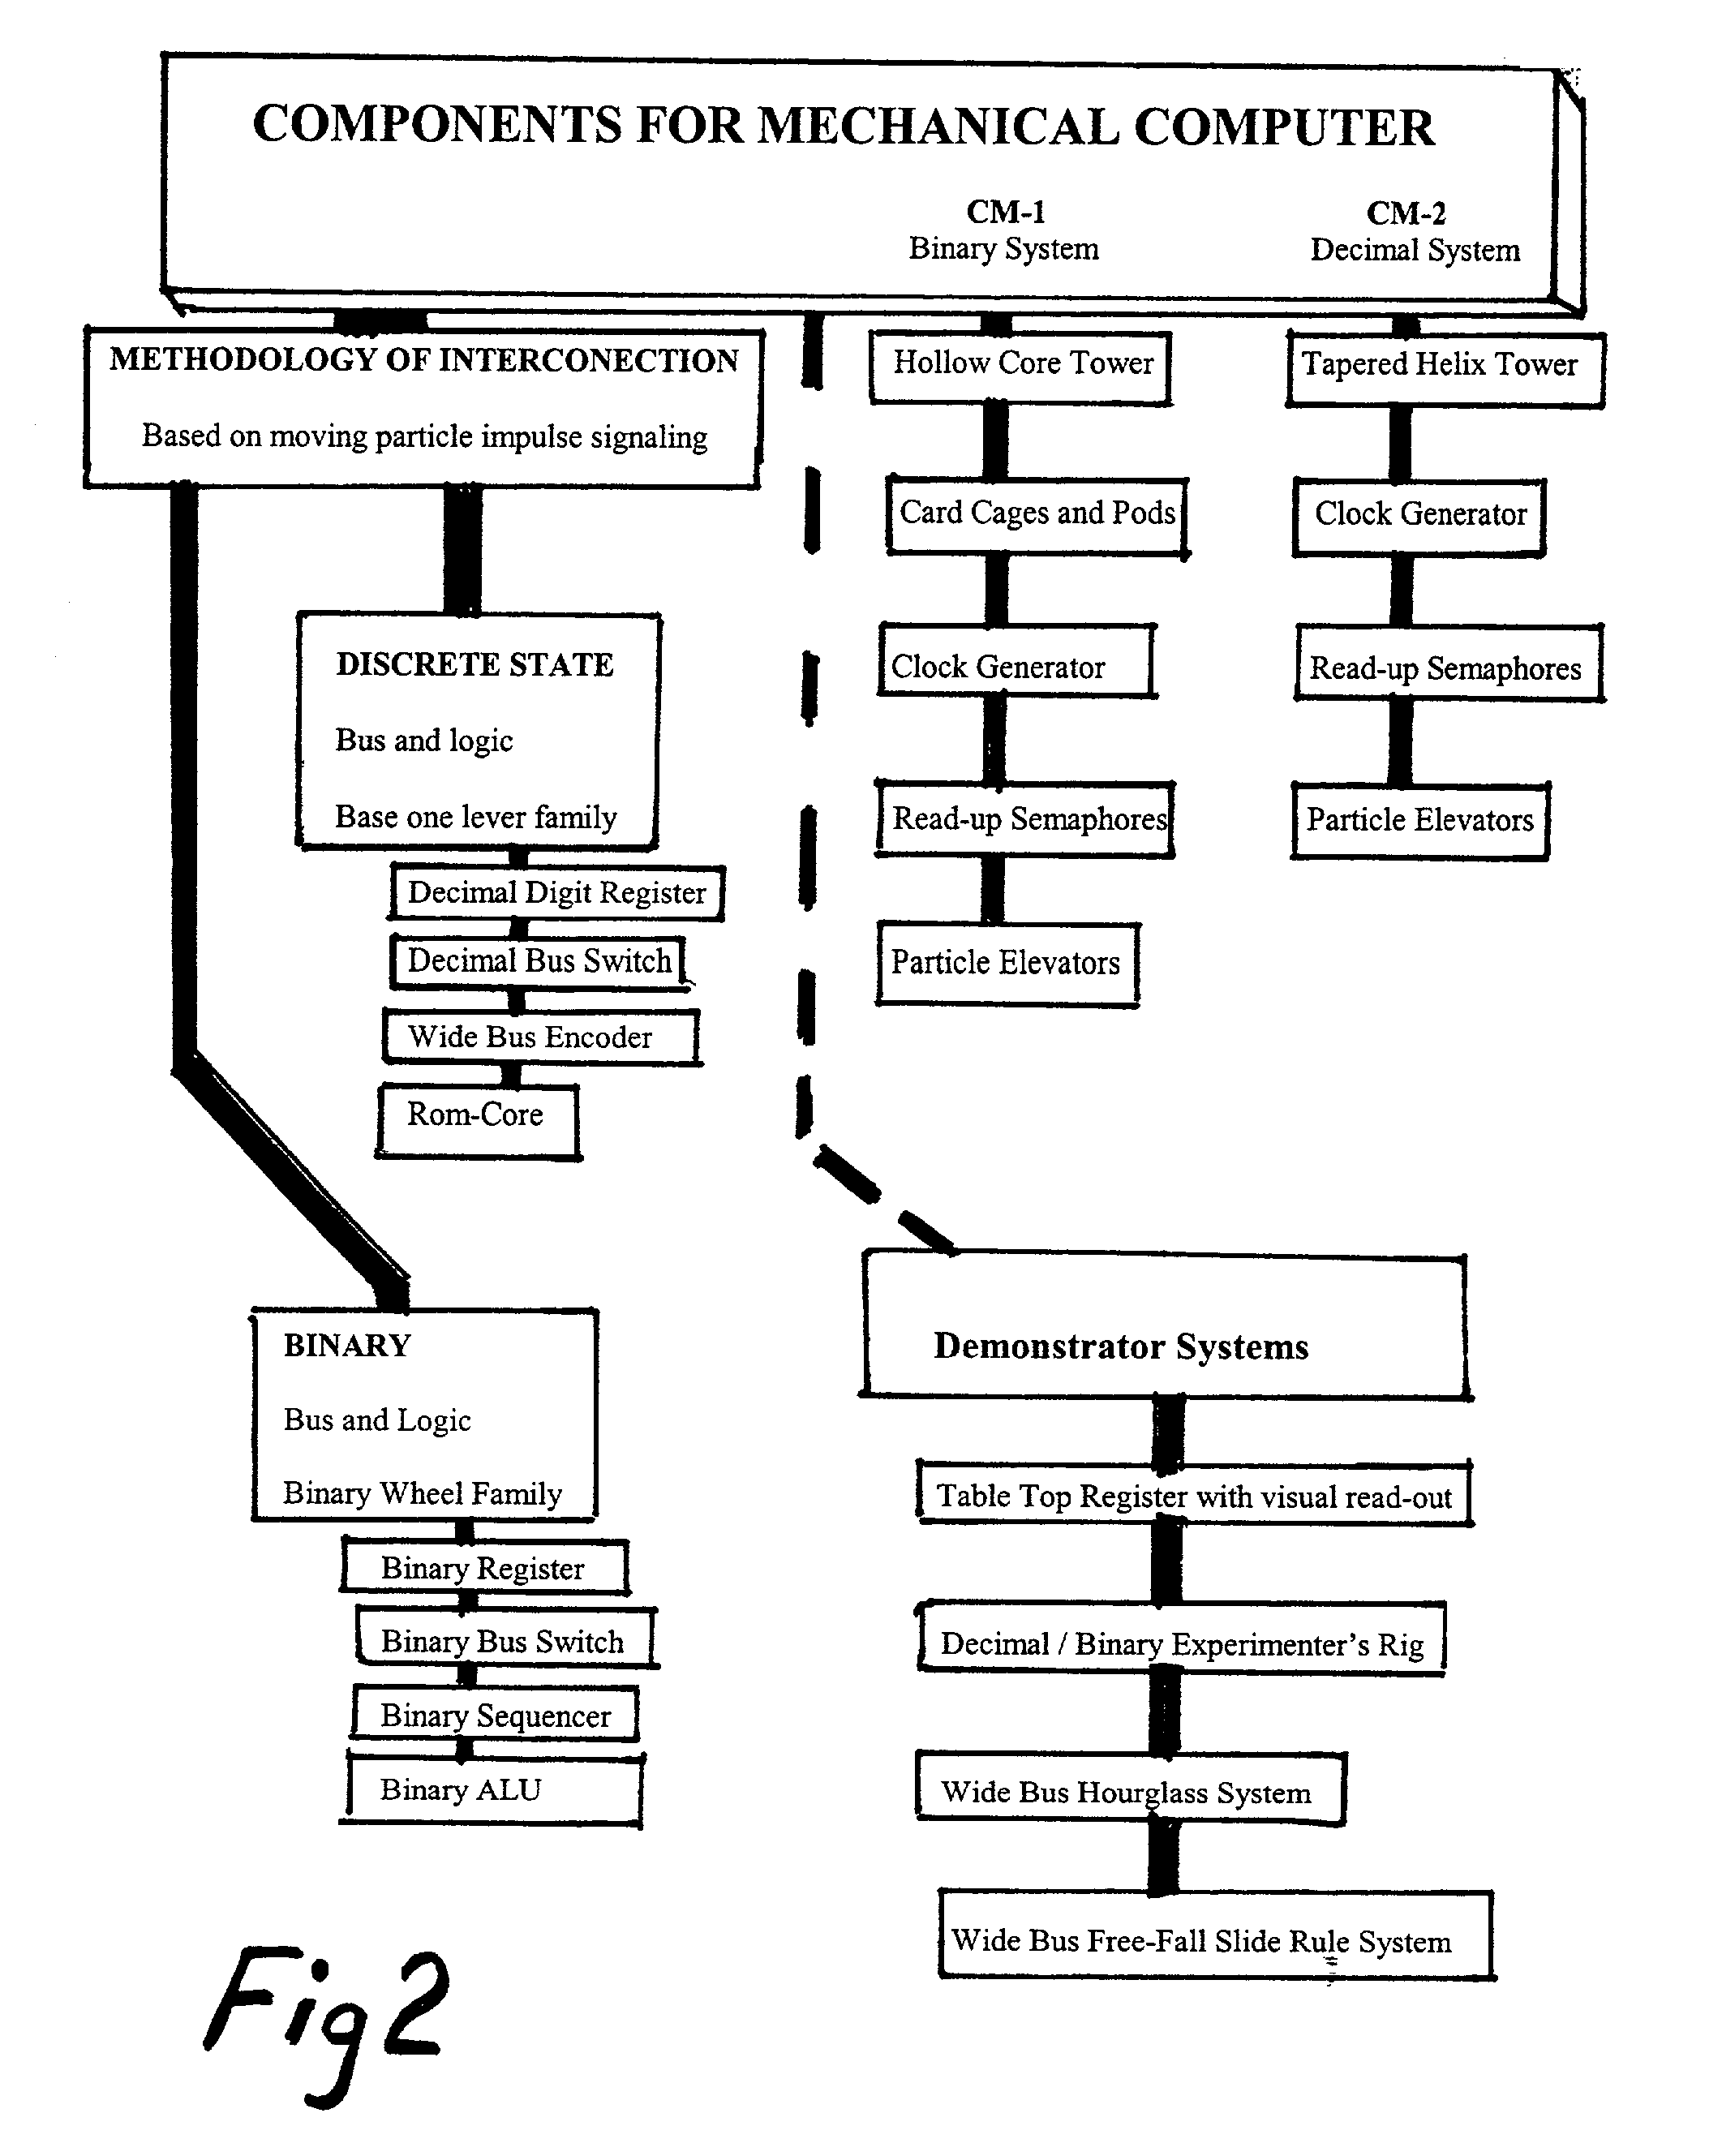 Methods and components for mechanical computer